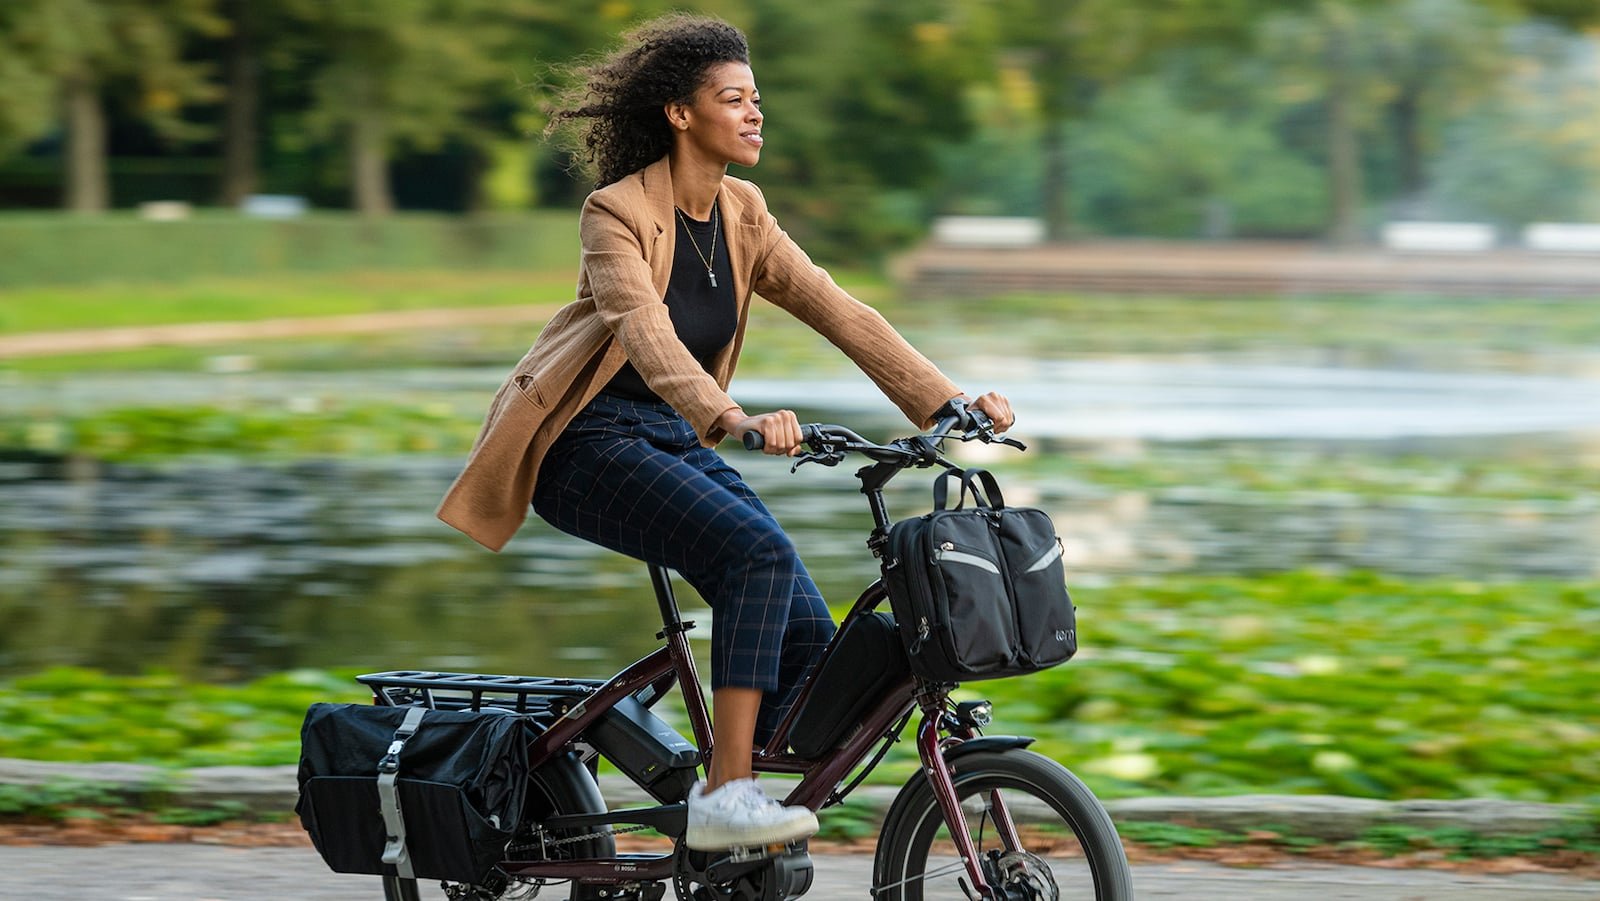 Tern Quick Haul practical eBike series is compact and transports both cargo and passengers